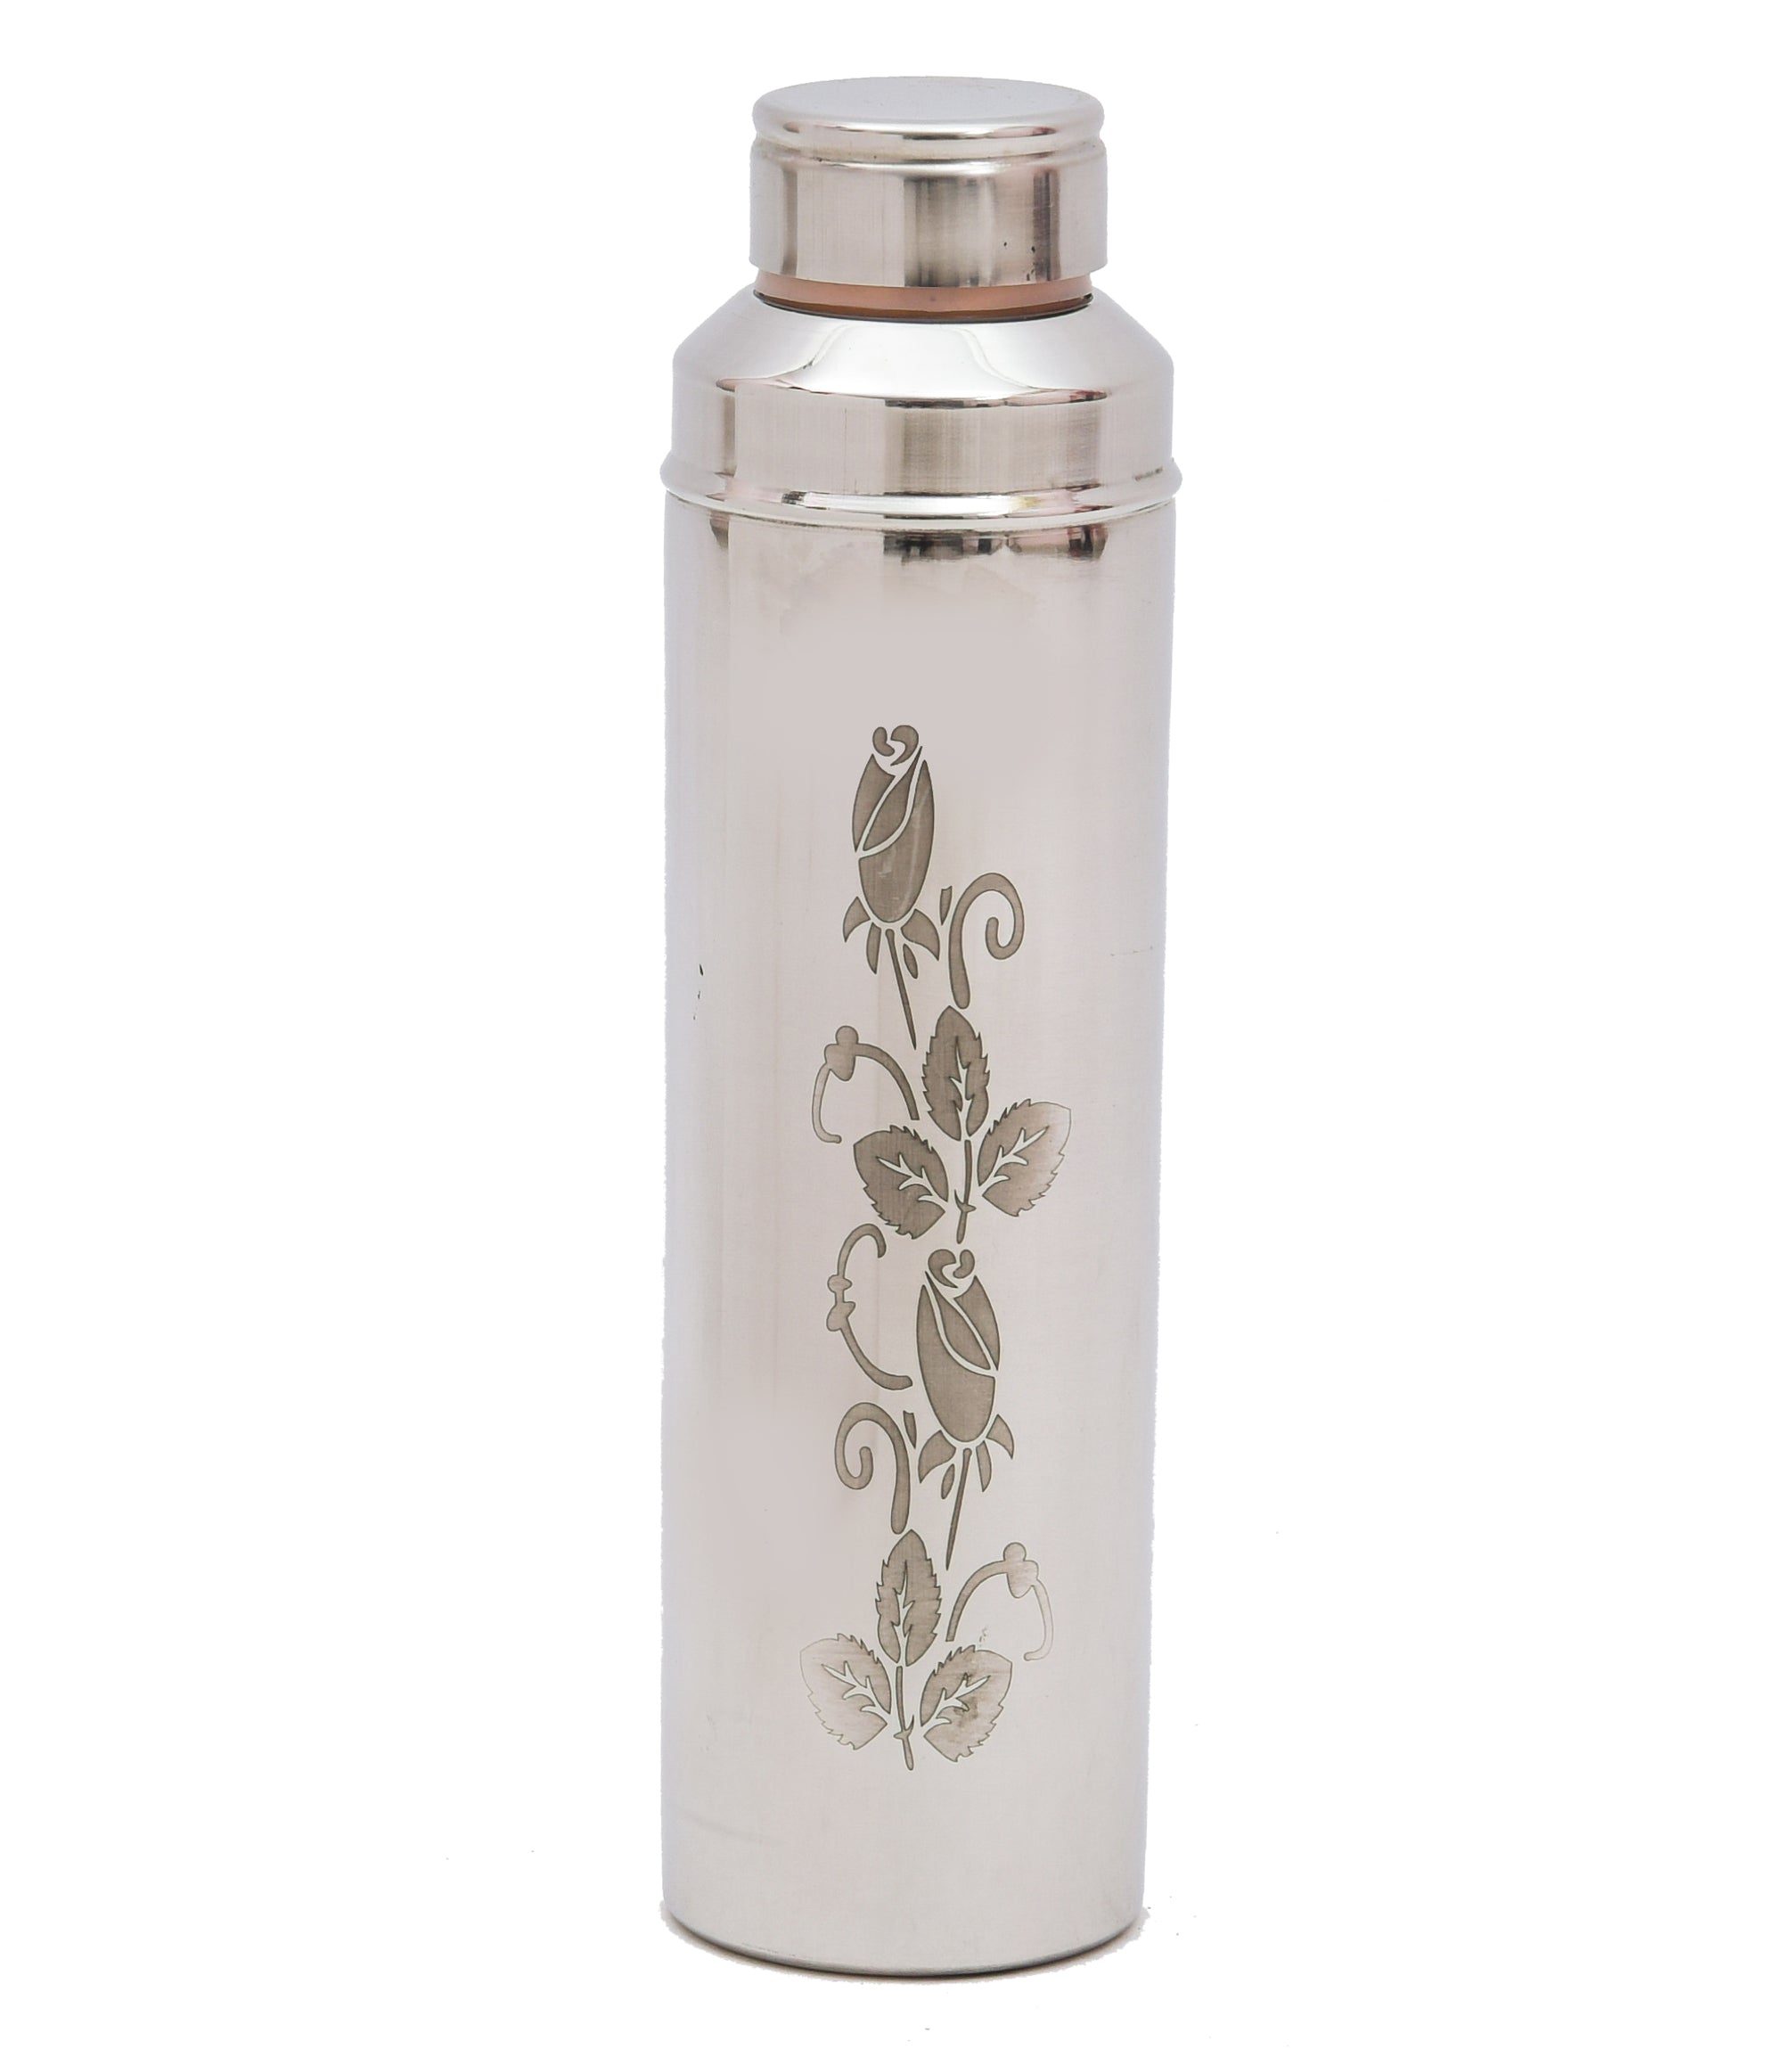 OUTSIDE STAINLESS STEEL AND INSIDE PURE COPPER WATER BOTTLE - 1000ML